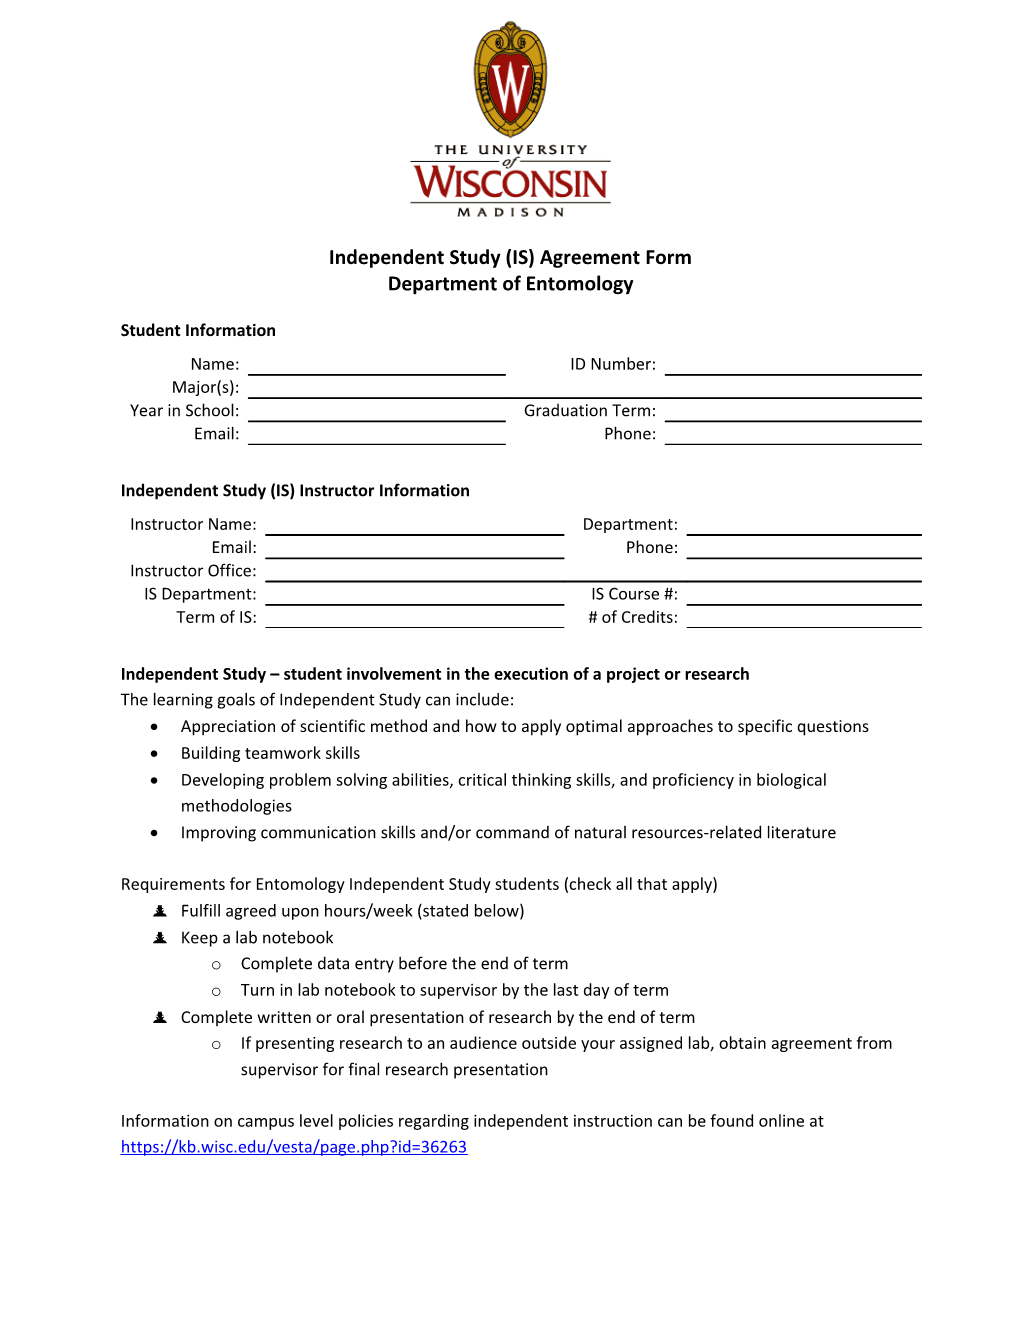 Independent Study (IS) Agreement Form